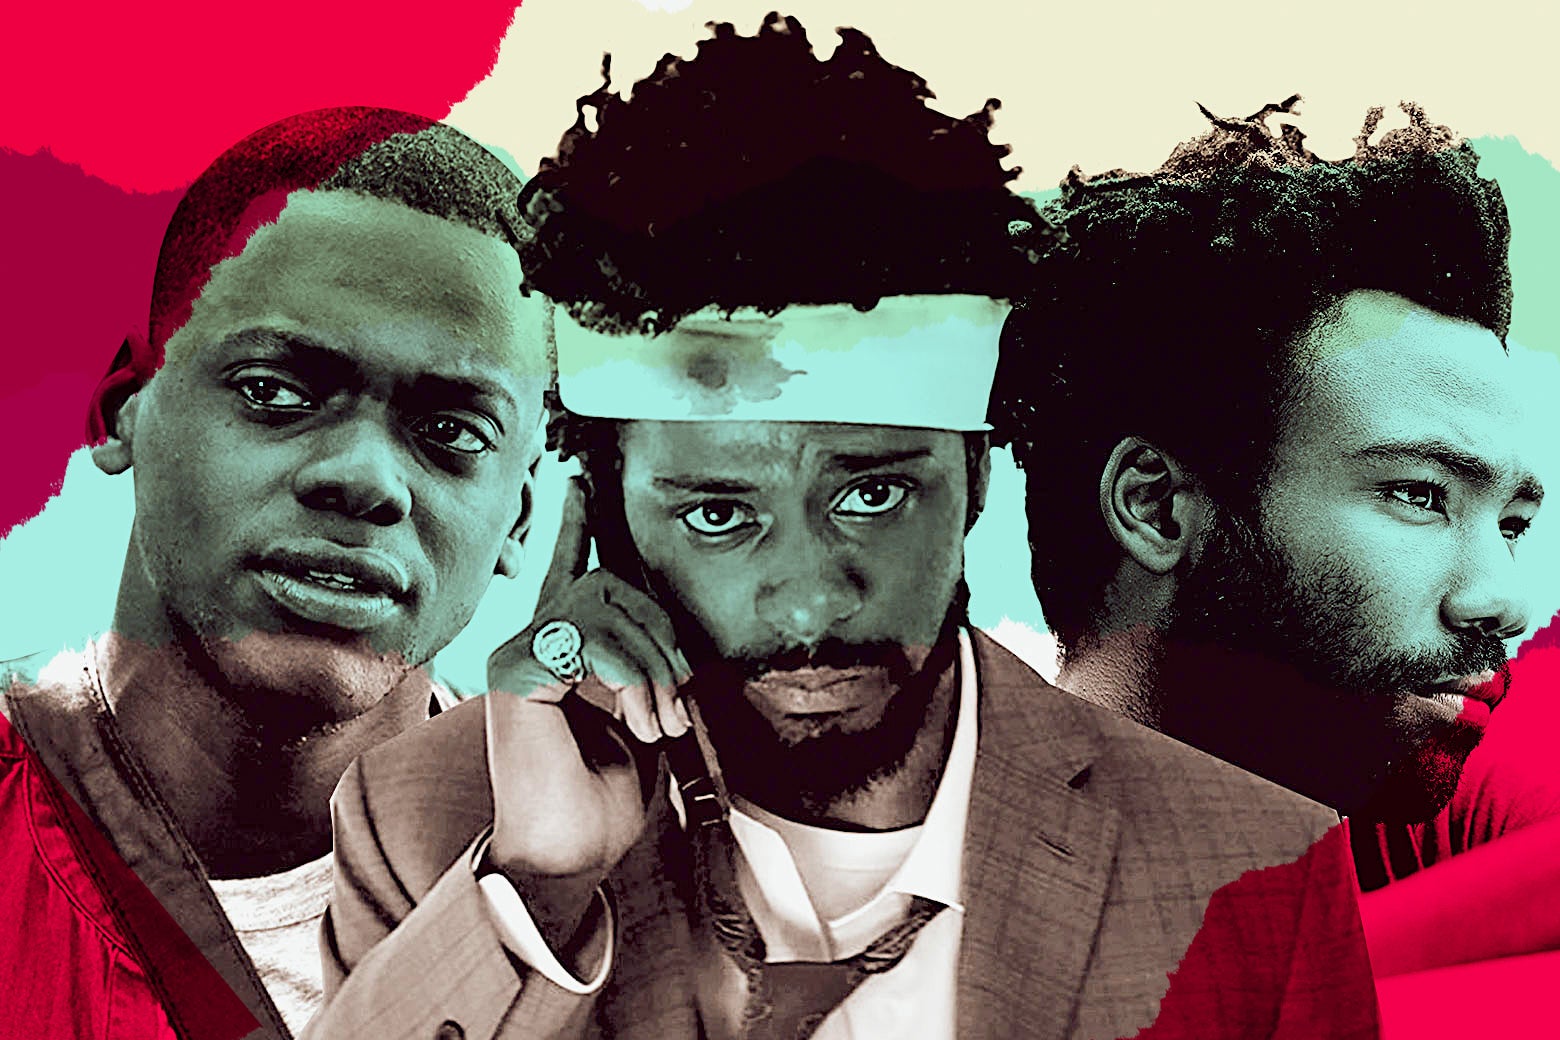 Actors Daniel Kaluuya in Get Out, Lakeith Stanfield in Sorry to Bother You, and Donald Glover in Atlanta.